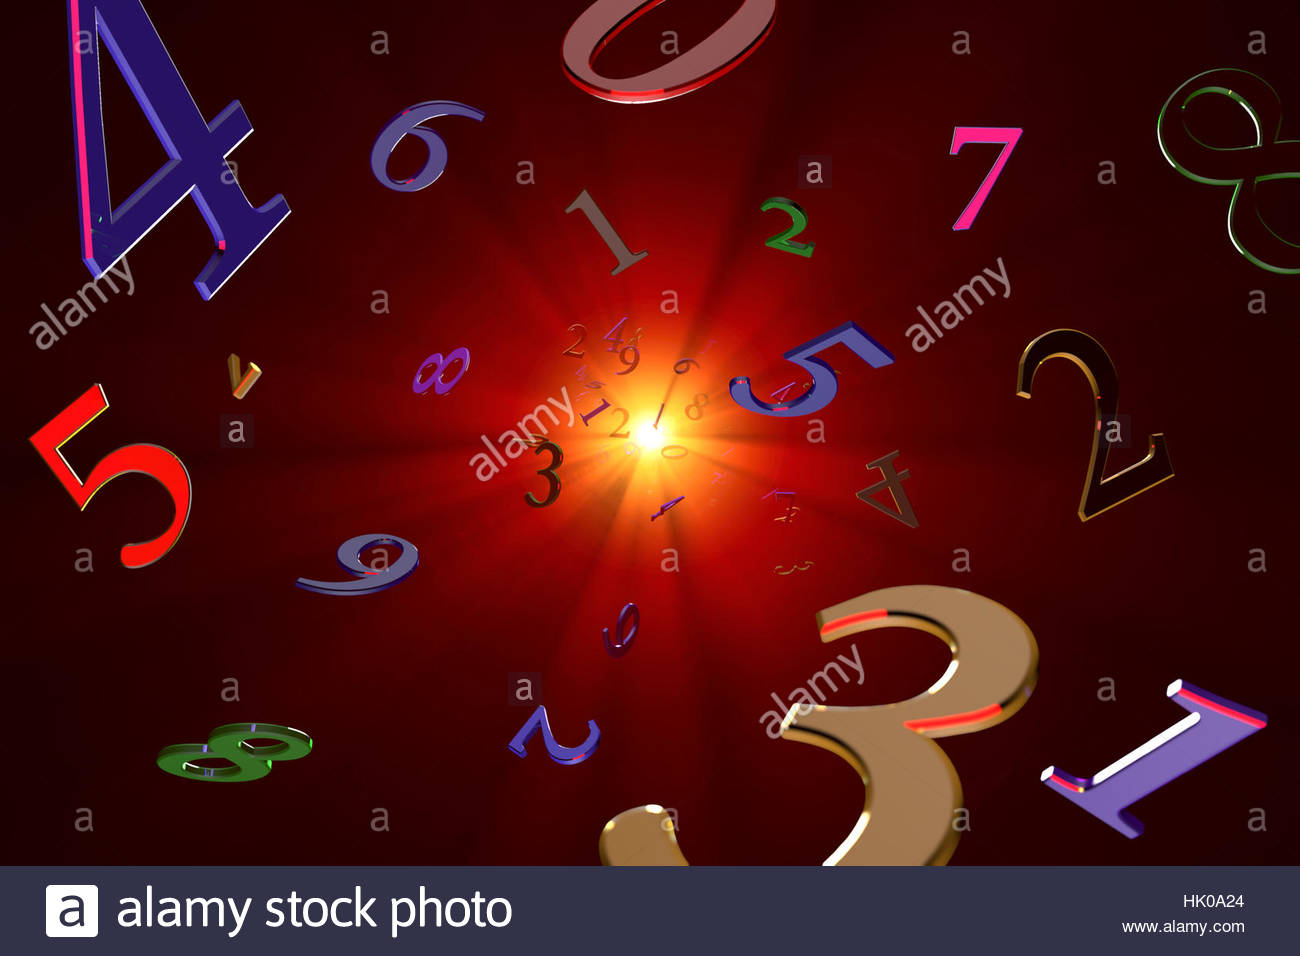 Numerology, esoteric science, secret knowledge ... Stock Photo